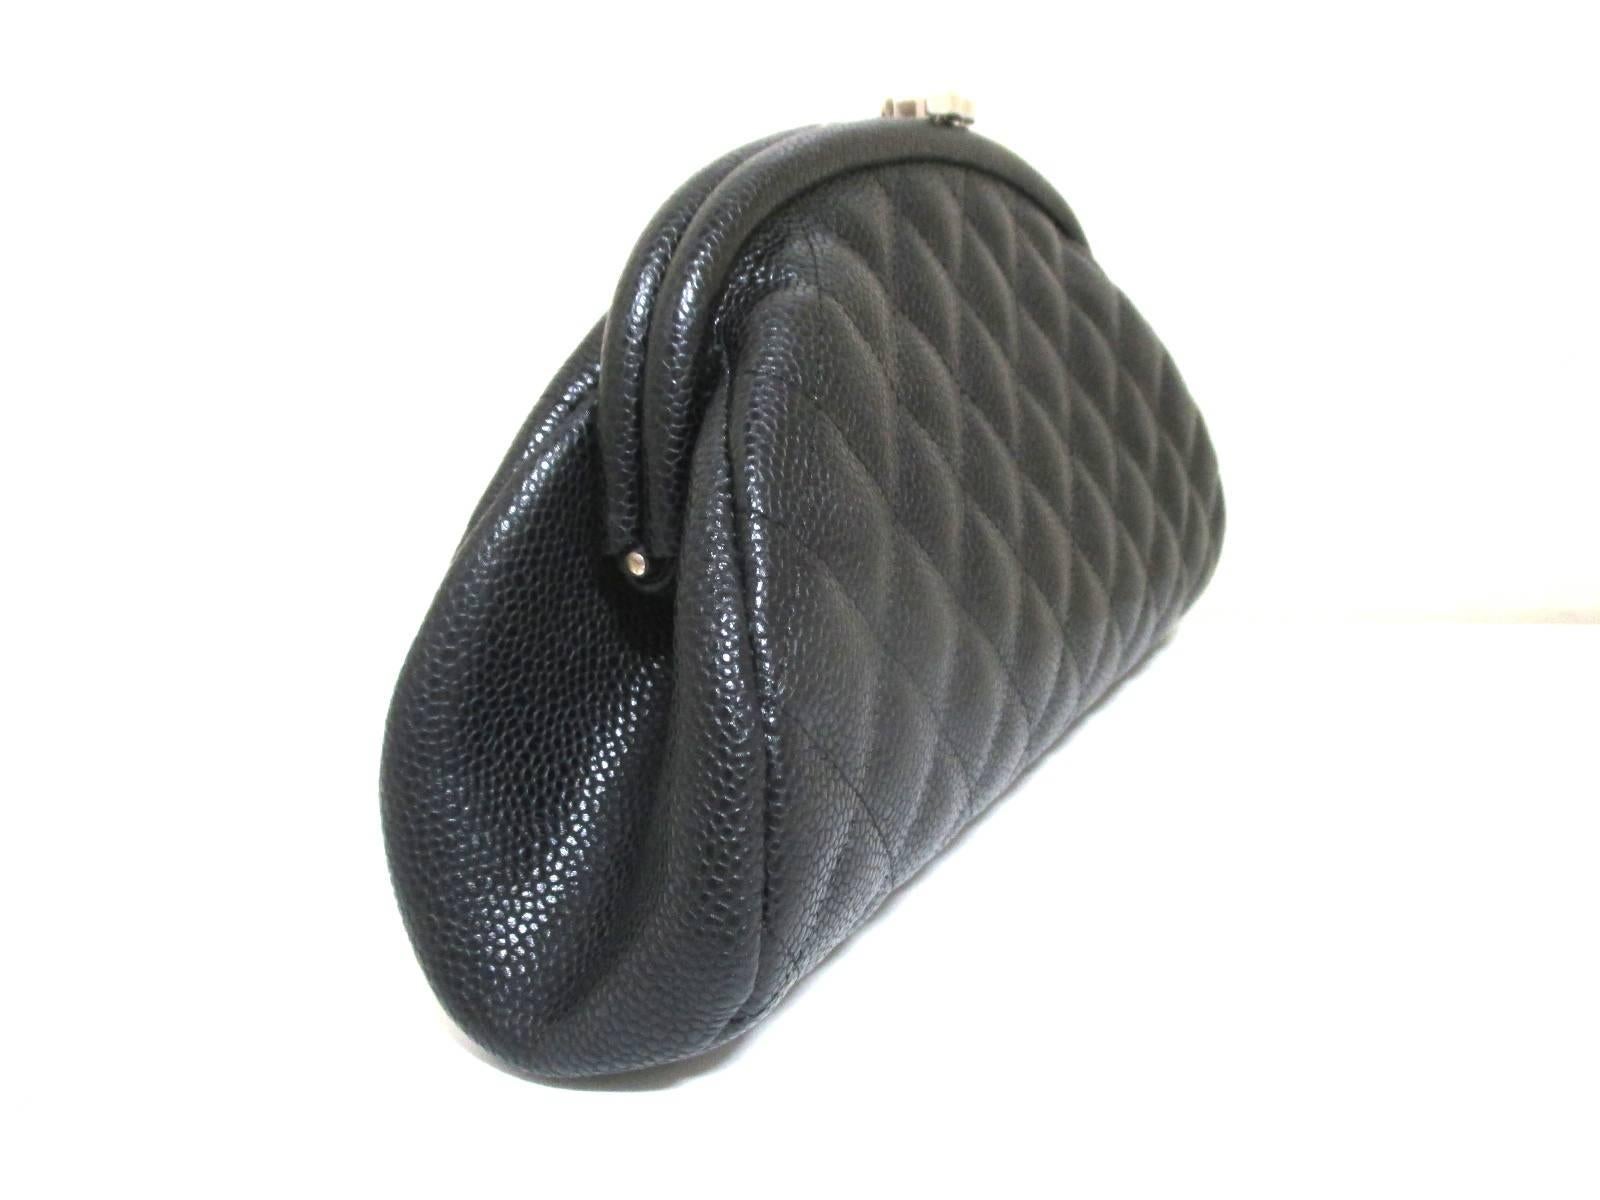 MINT. Vintage CHANEL kiss-lock closure large black caviar leather pouch purse with silver tone CC motif. Rare chic and mod bag for party, cosmetics, toiletries use.

MINT. Vintage CHANEL black lamb leather quilted large clutch purse with kiss lock